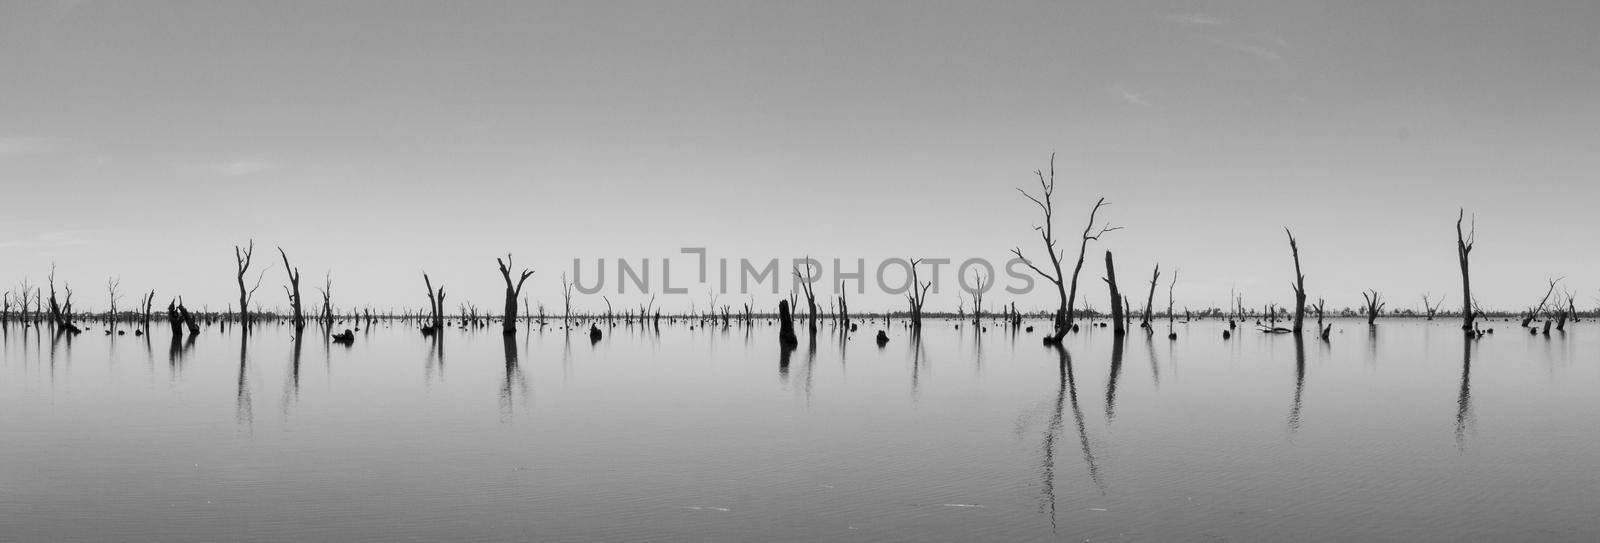 Photograph of dead tree trunks sticking out of the water, Australia by bettercallcurry